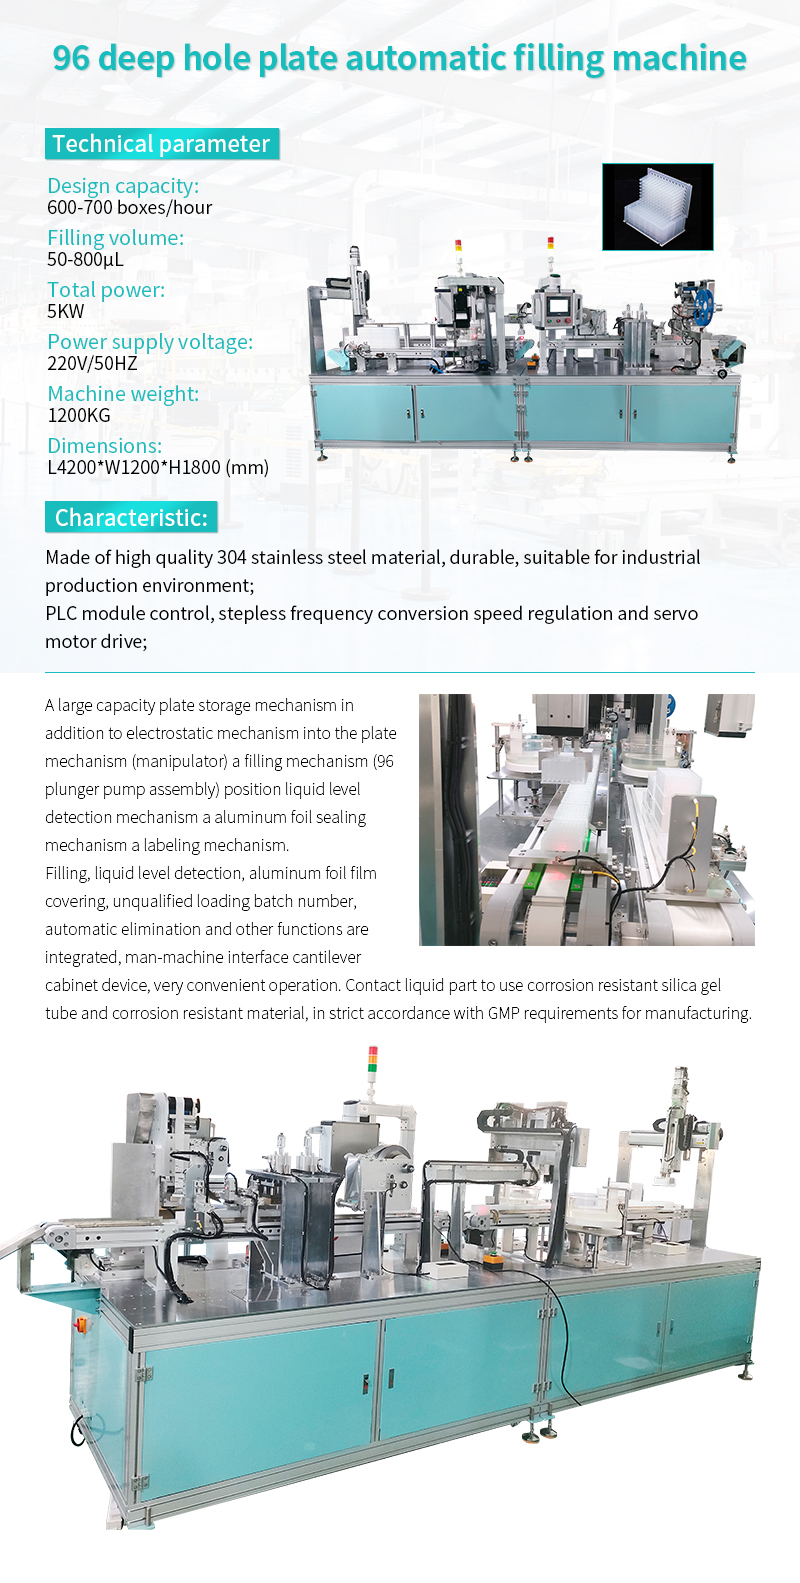 96 deep well plate automatic filling machine